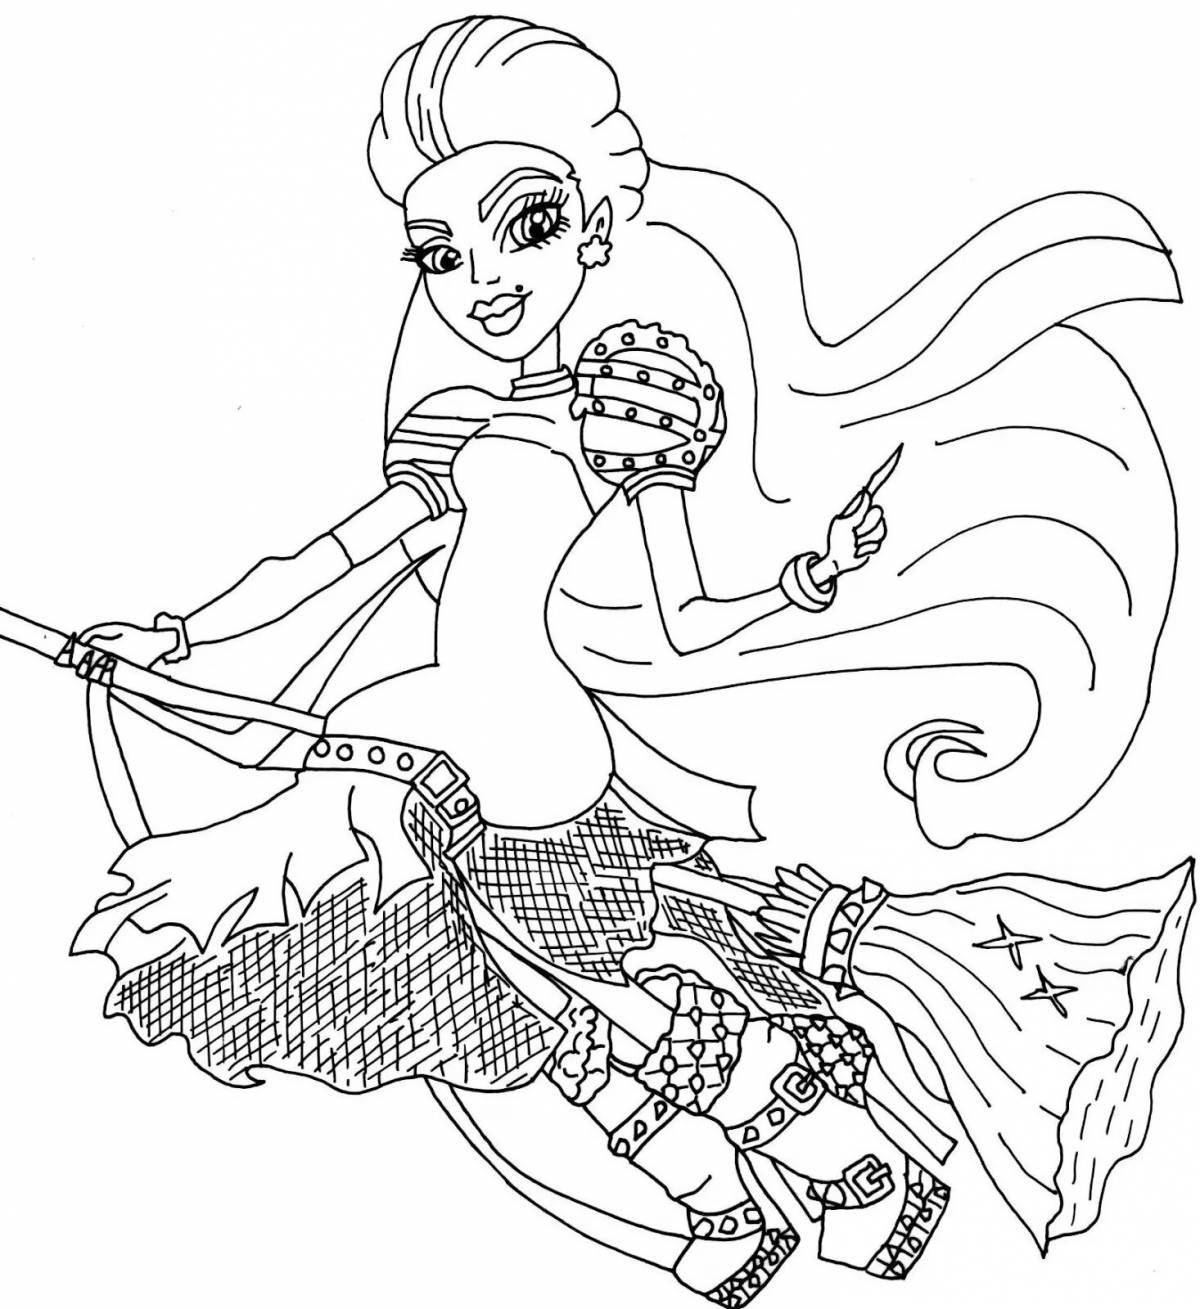 Monster high magic coloring page